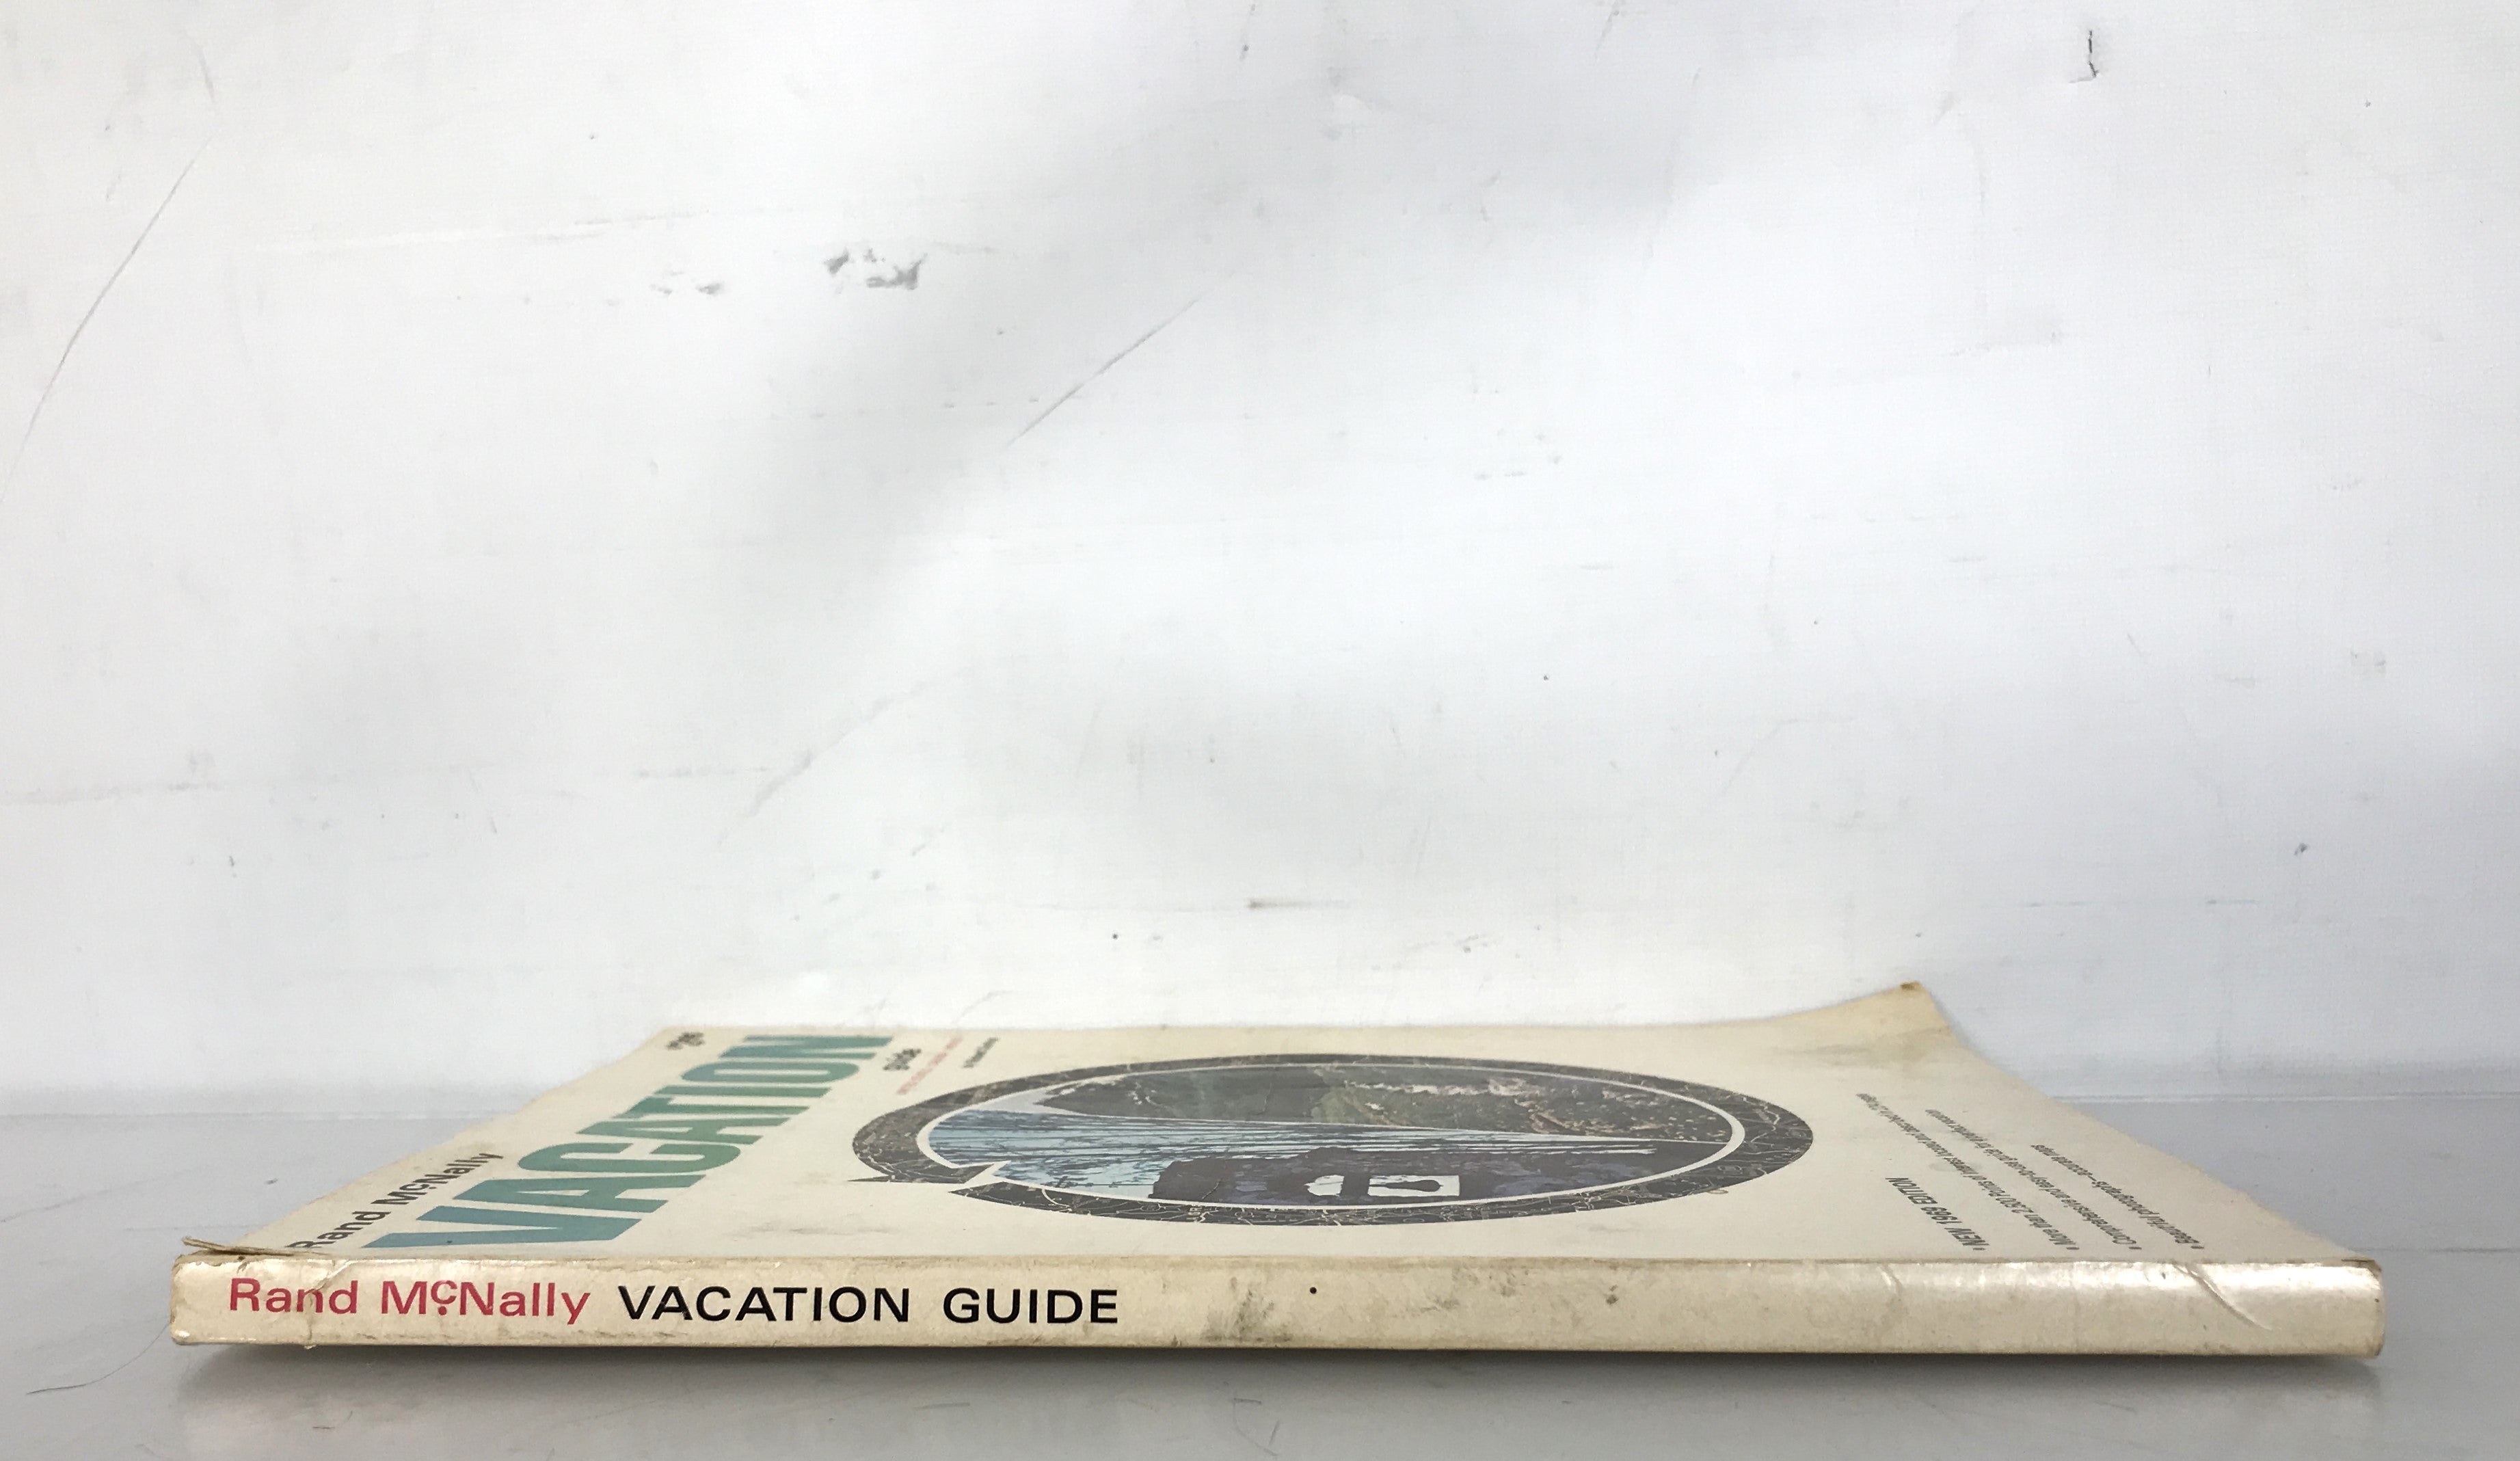 Rand McNally Vacation Guide US/Canada/Mexico 1969 Edition by Richard Dunlop SC